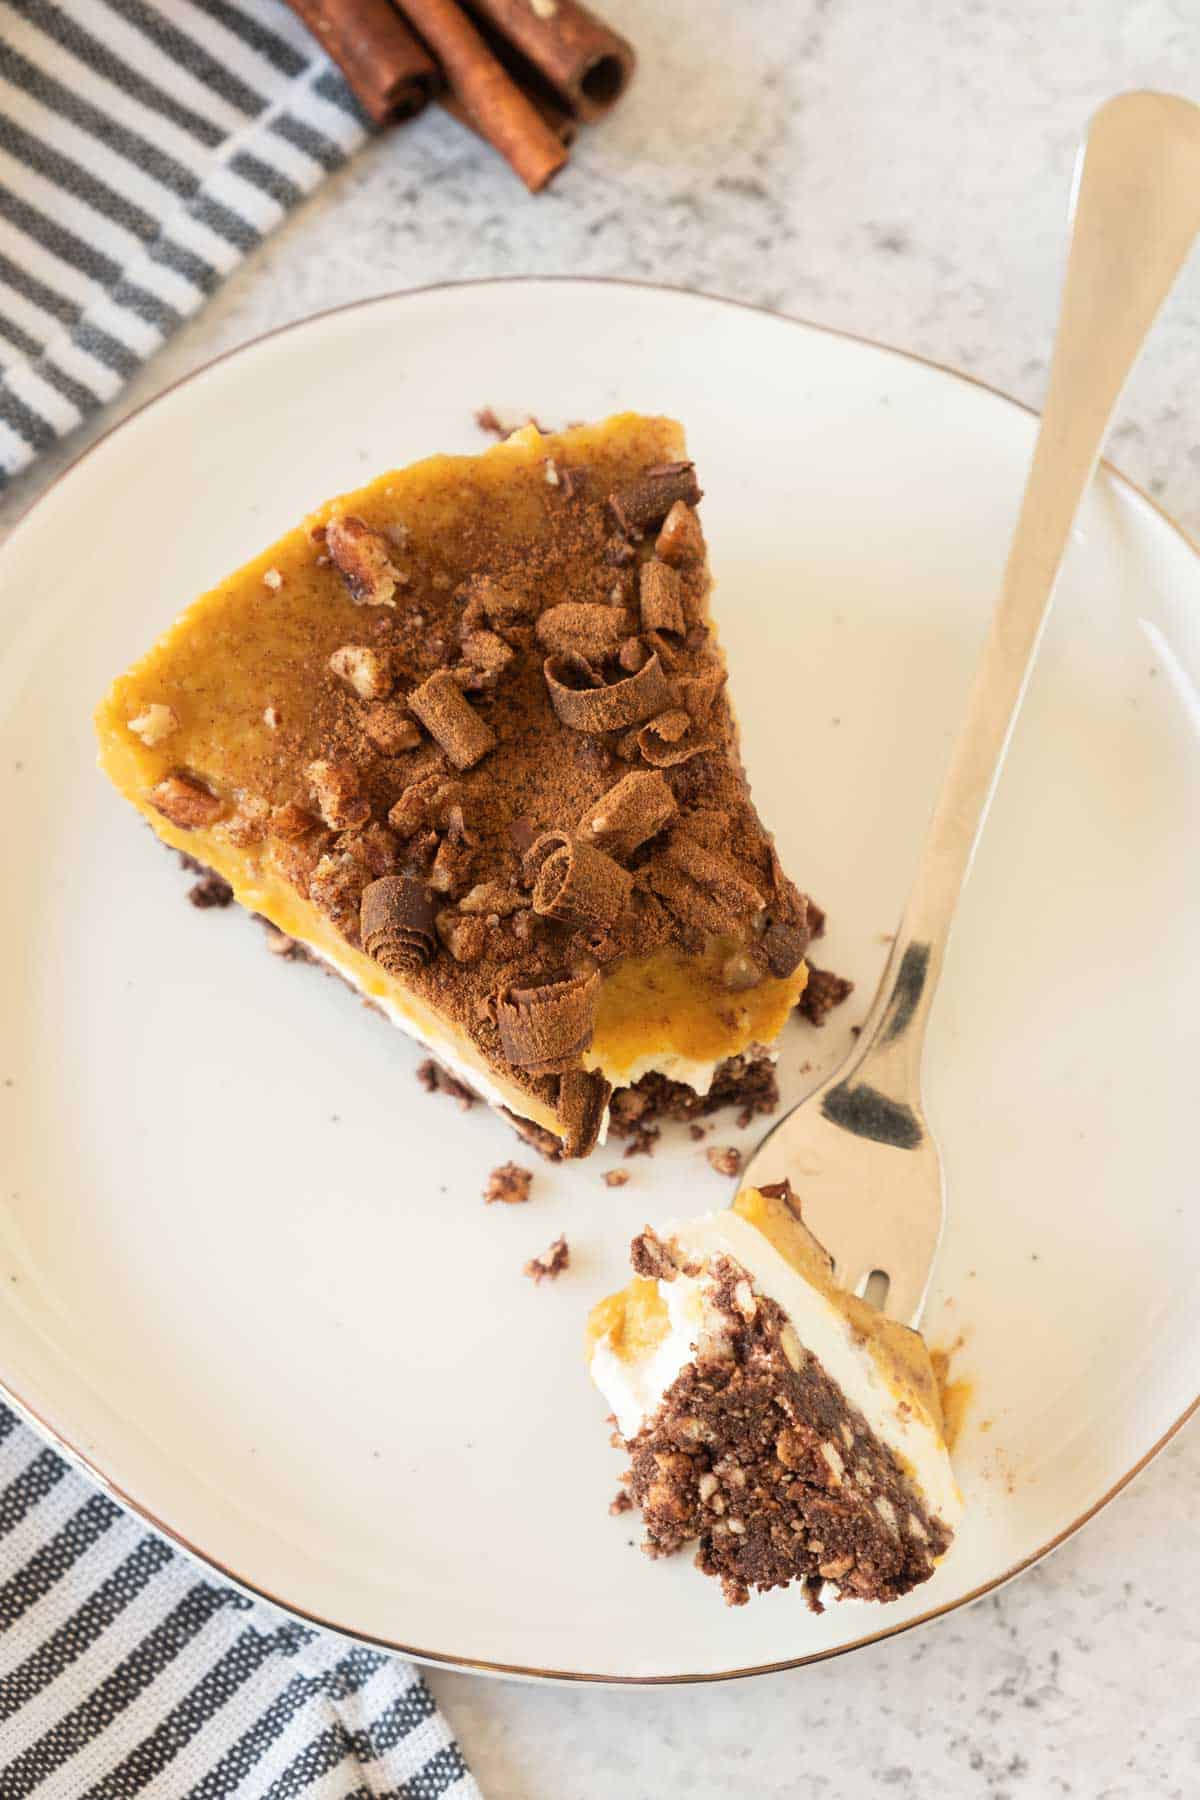 A slice of pumpkin pie on a plate with a fork.